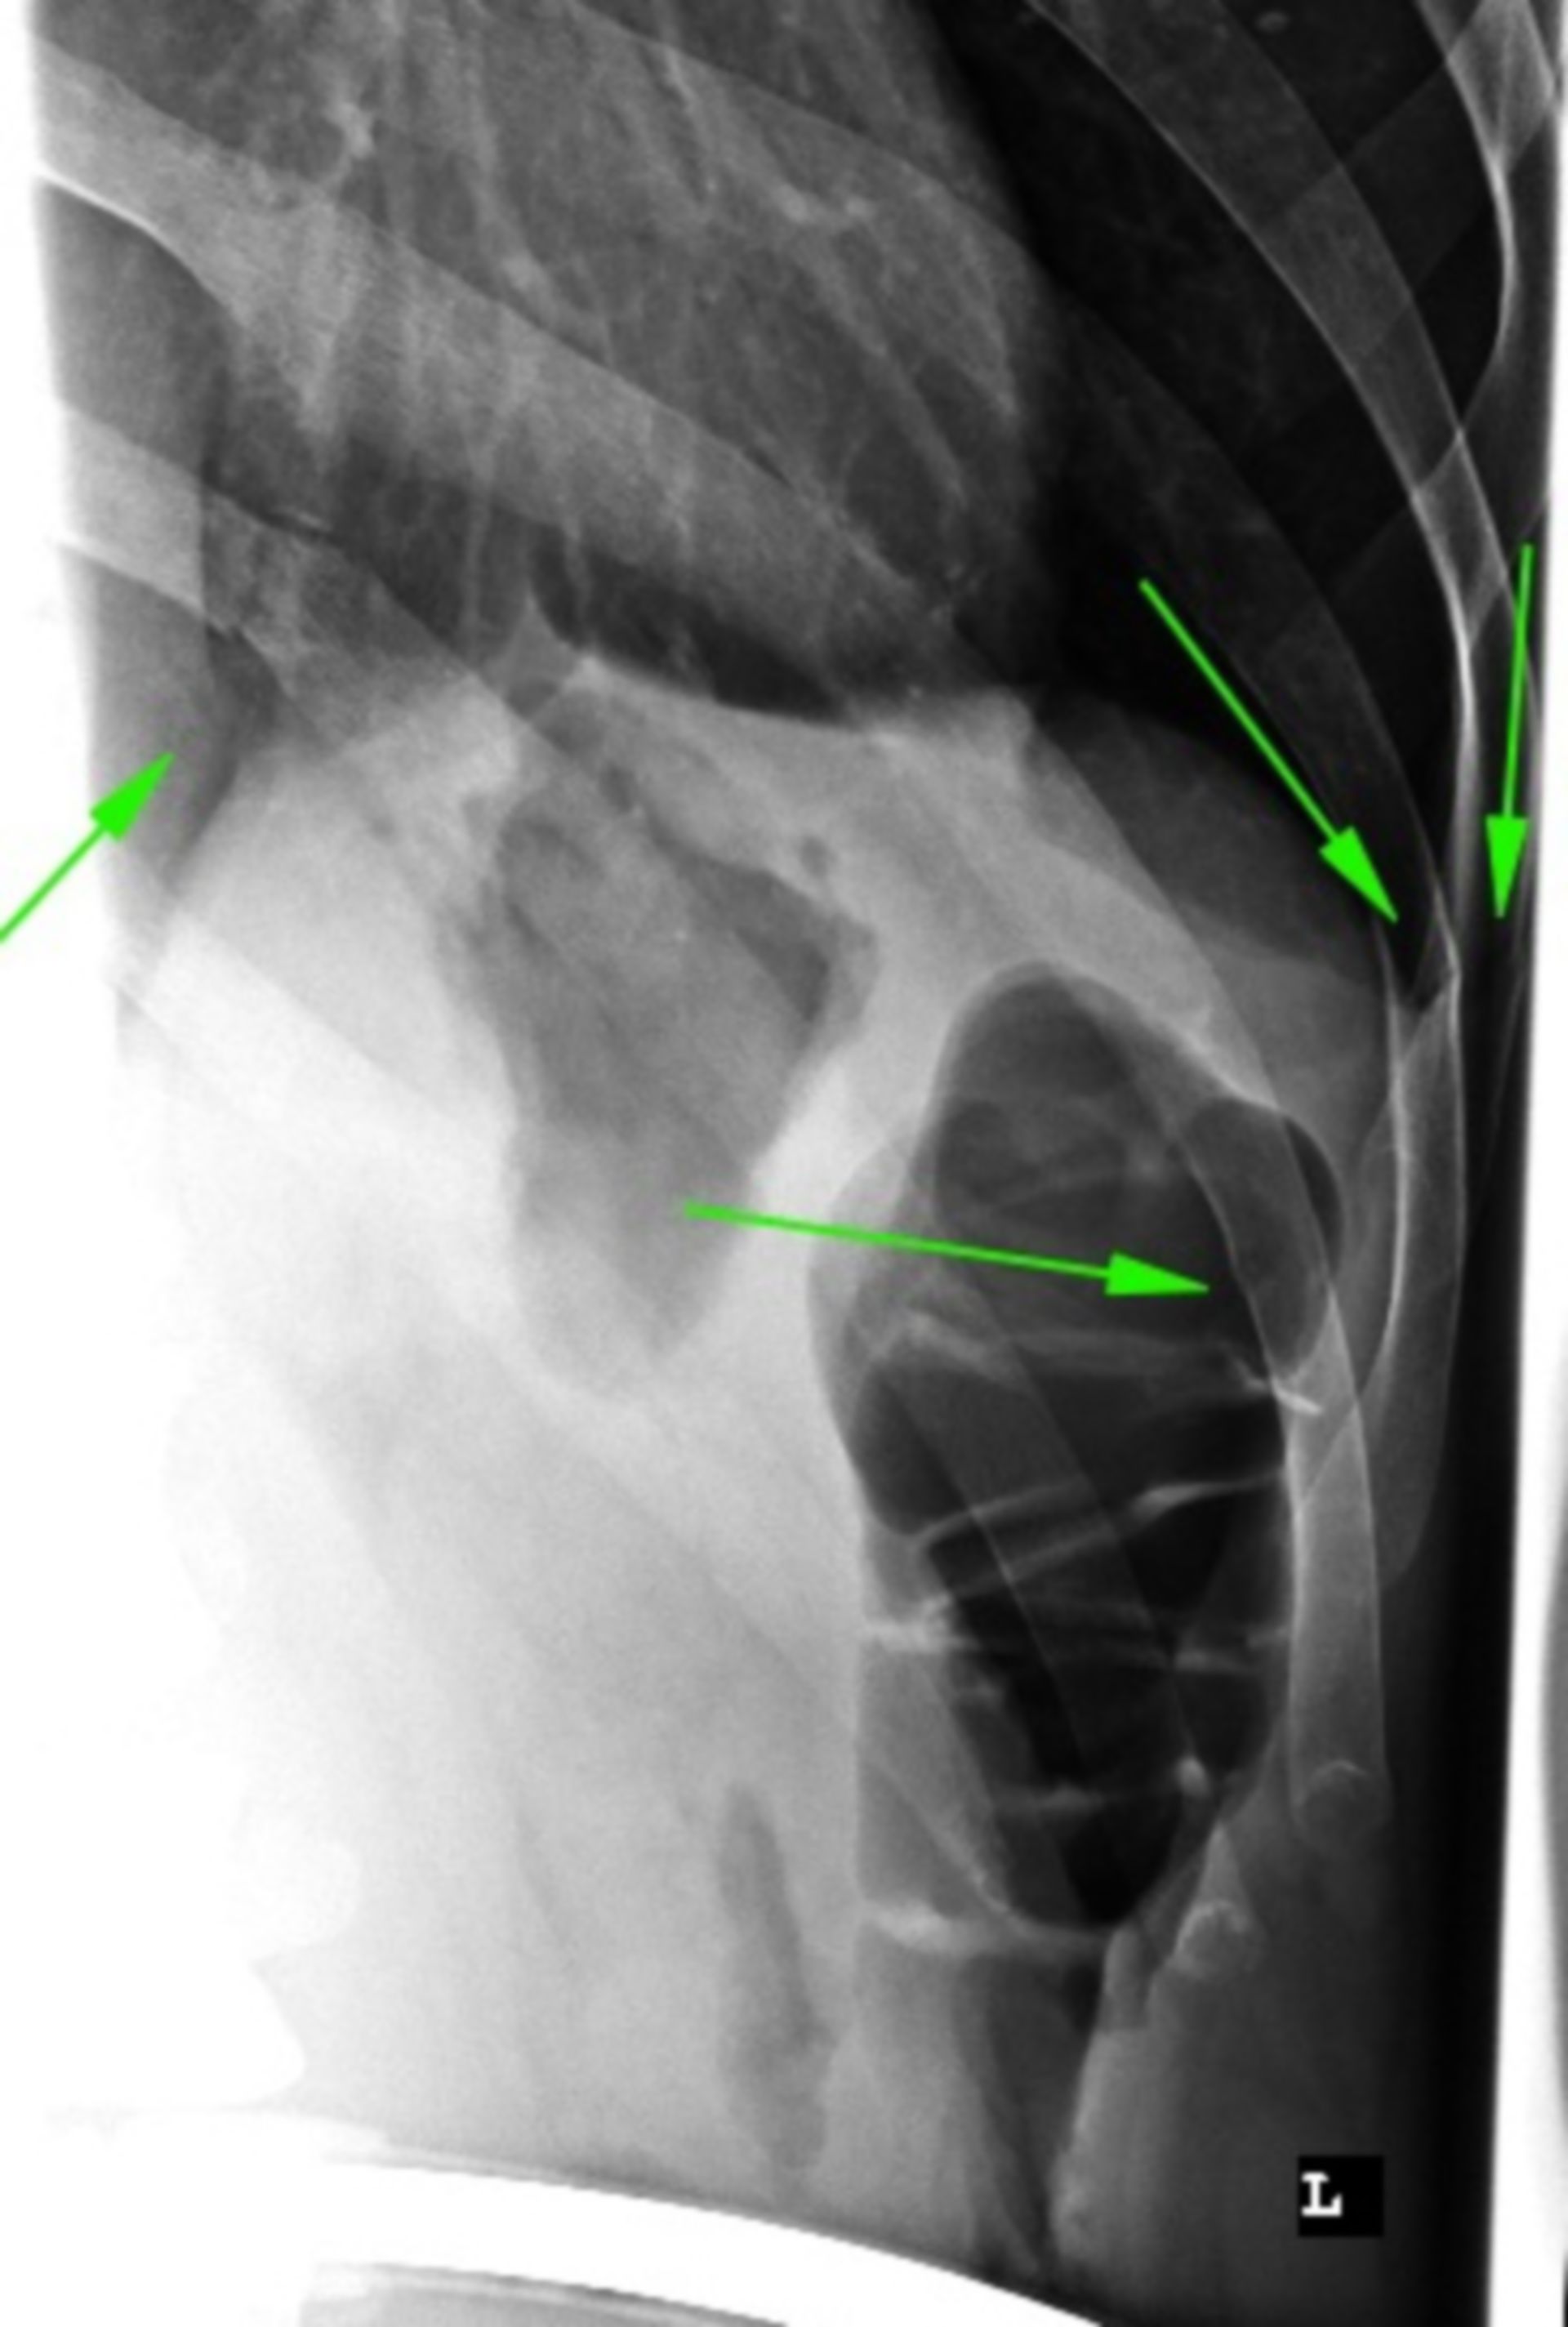 Rib fractures - hardly visible